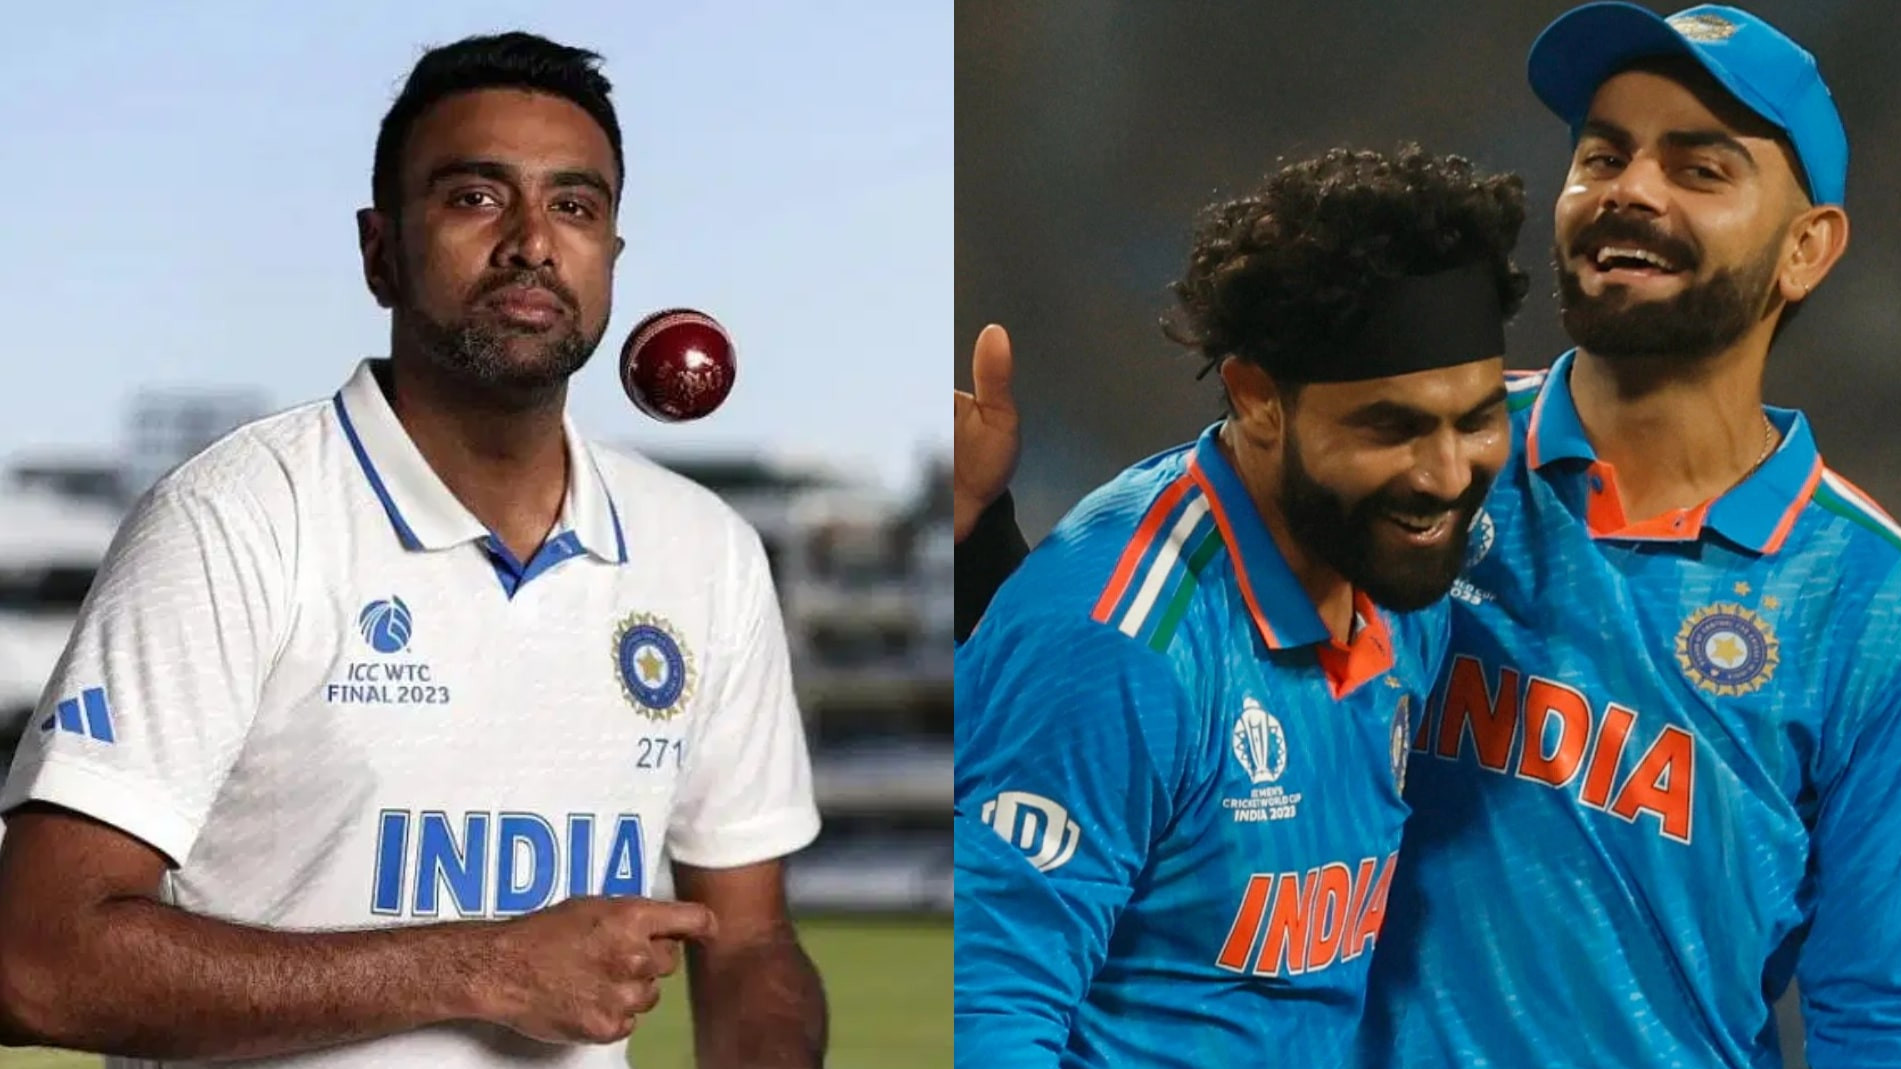 Ashwin nominated for Test Cricketer of the Year; Kohli, and Jadeja among the nominees for Cricketer of the Year